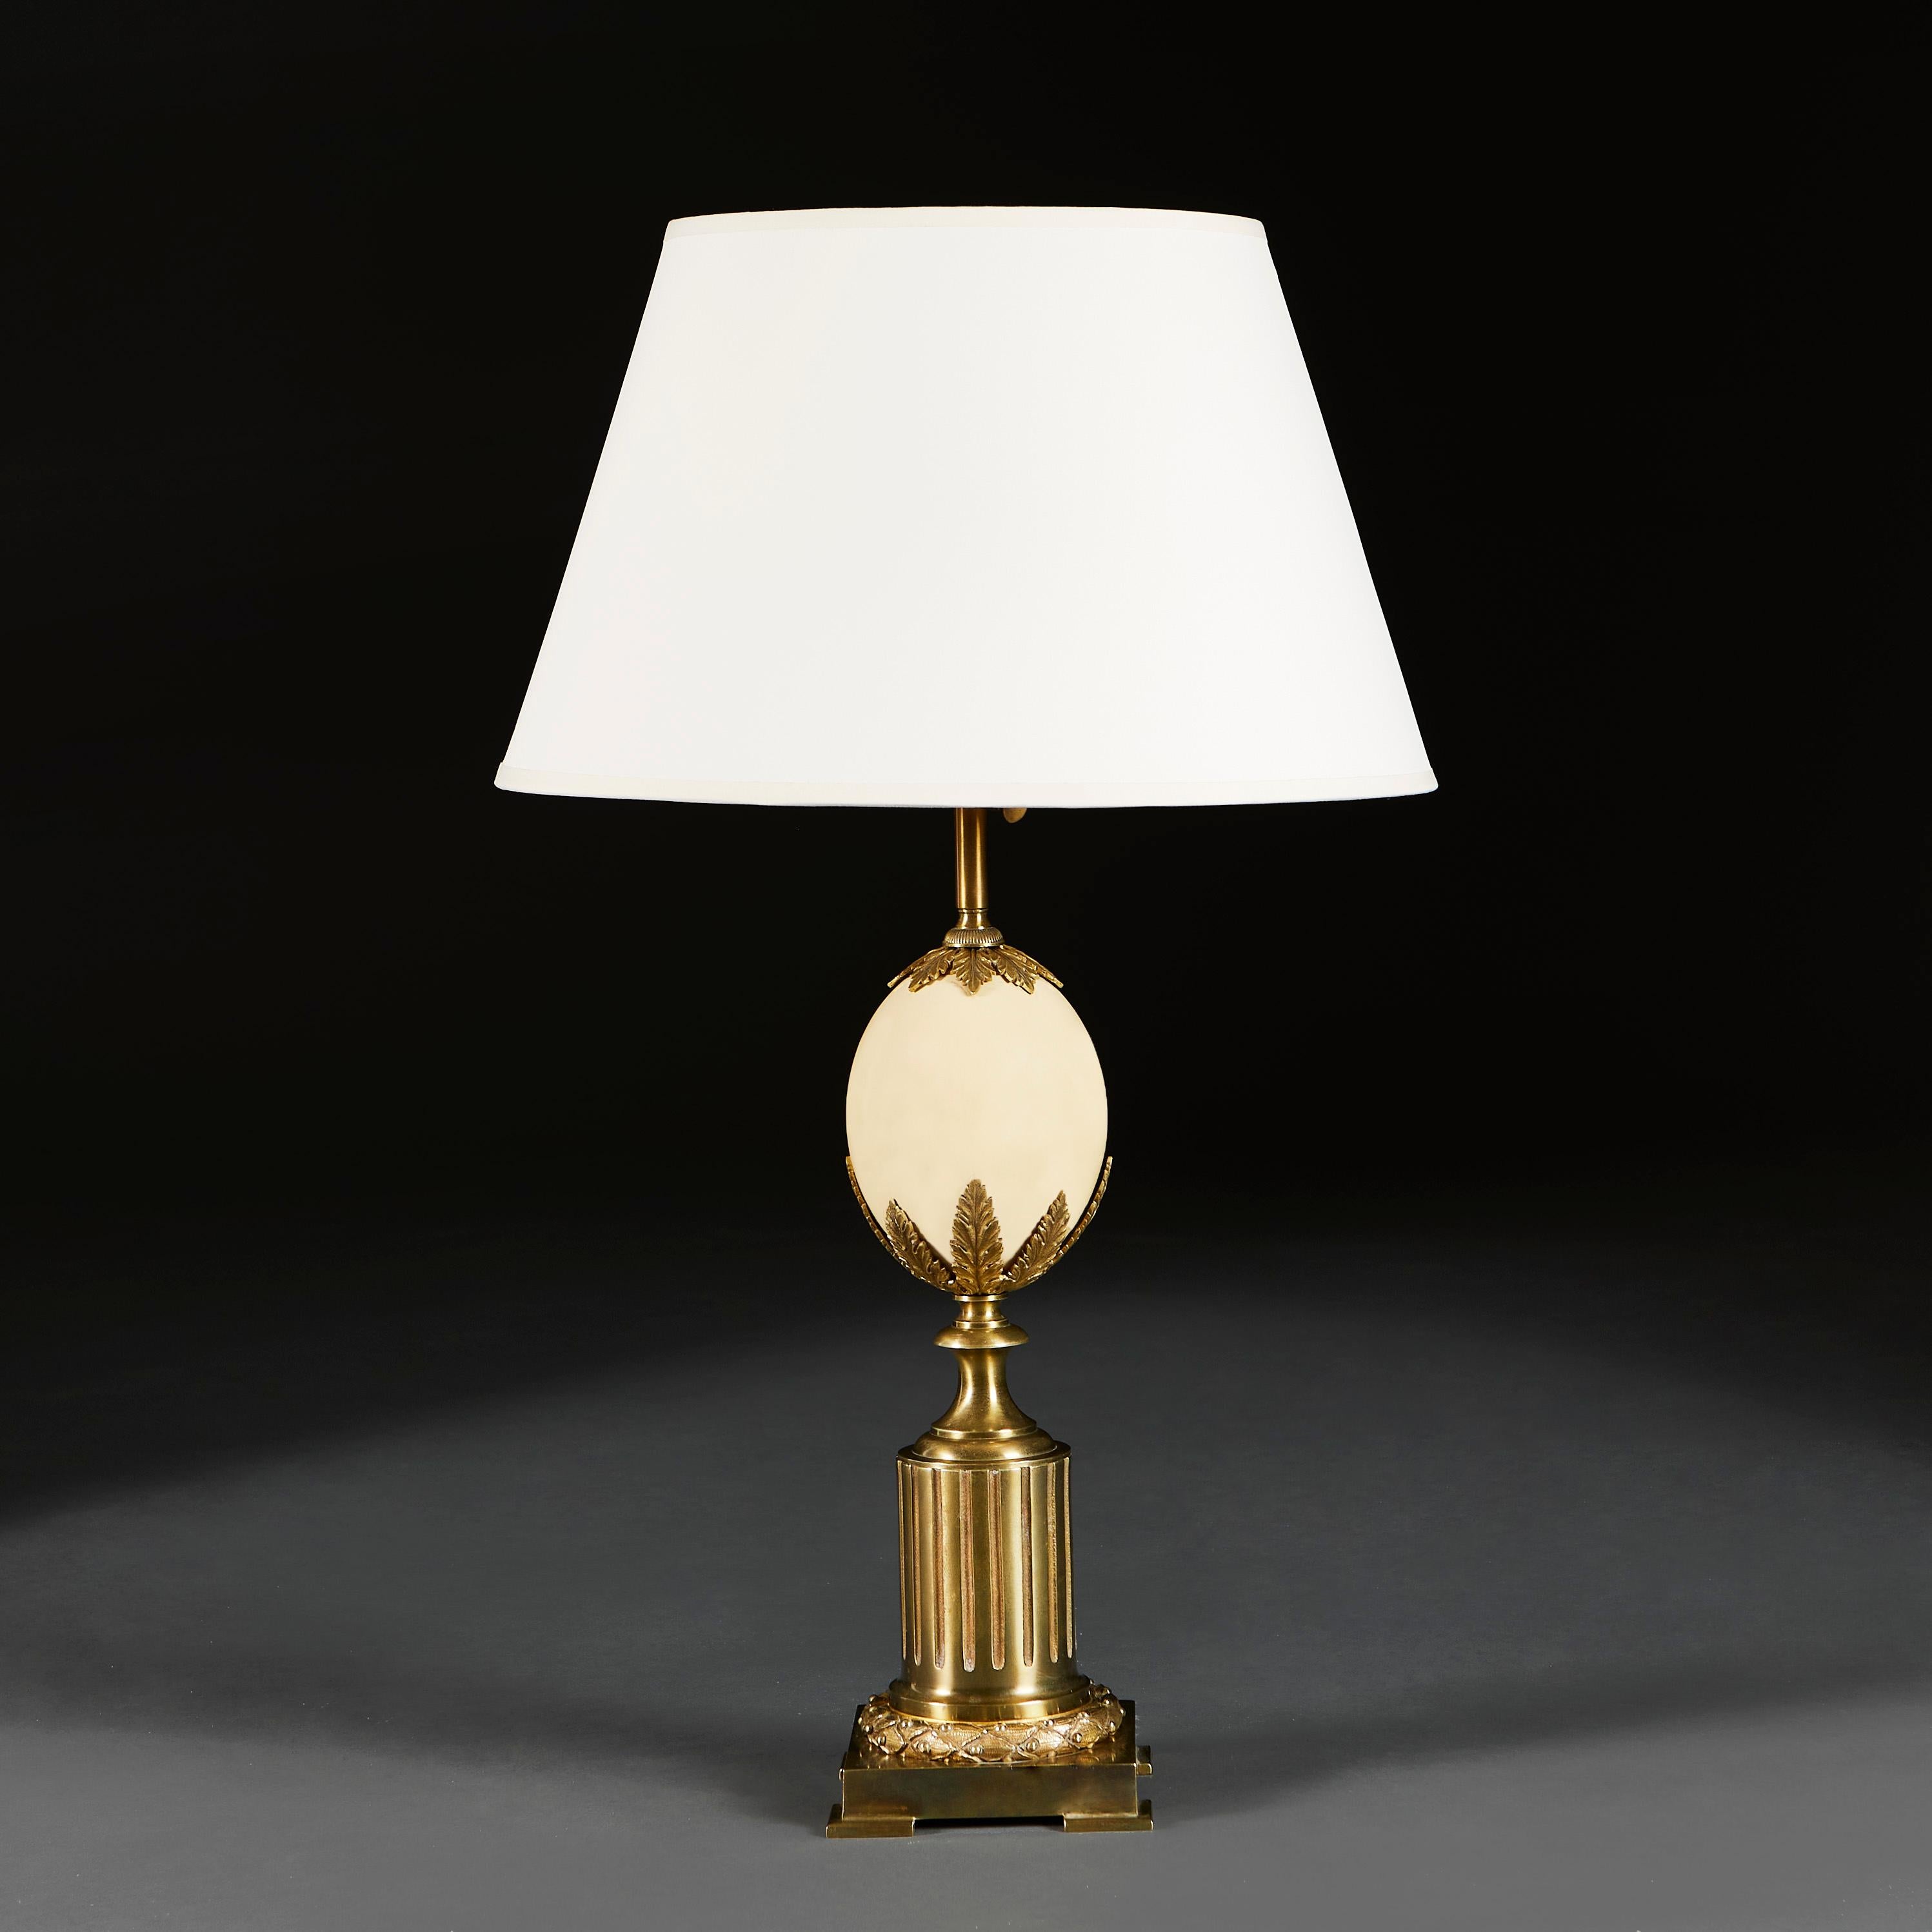 France, circa 1940

A large brass lamp with ostrich egg supported in a spray of acanthus leaves, all supported on a gadrooned cylinder atop a square plinth base with laurel leaf roundel.

Height of lamp 45.00cm
Height with shade 74.00cm
Width of